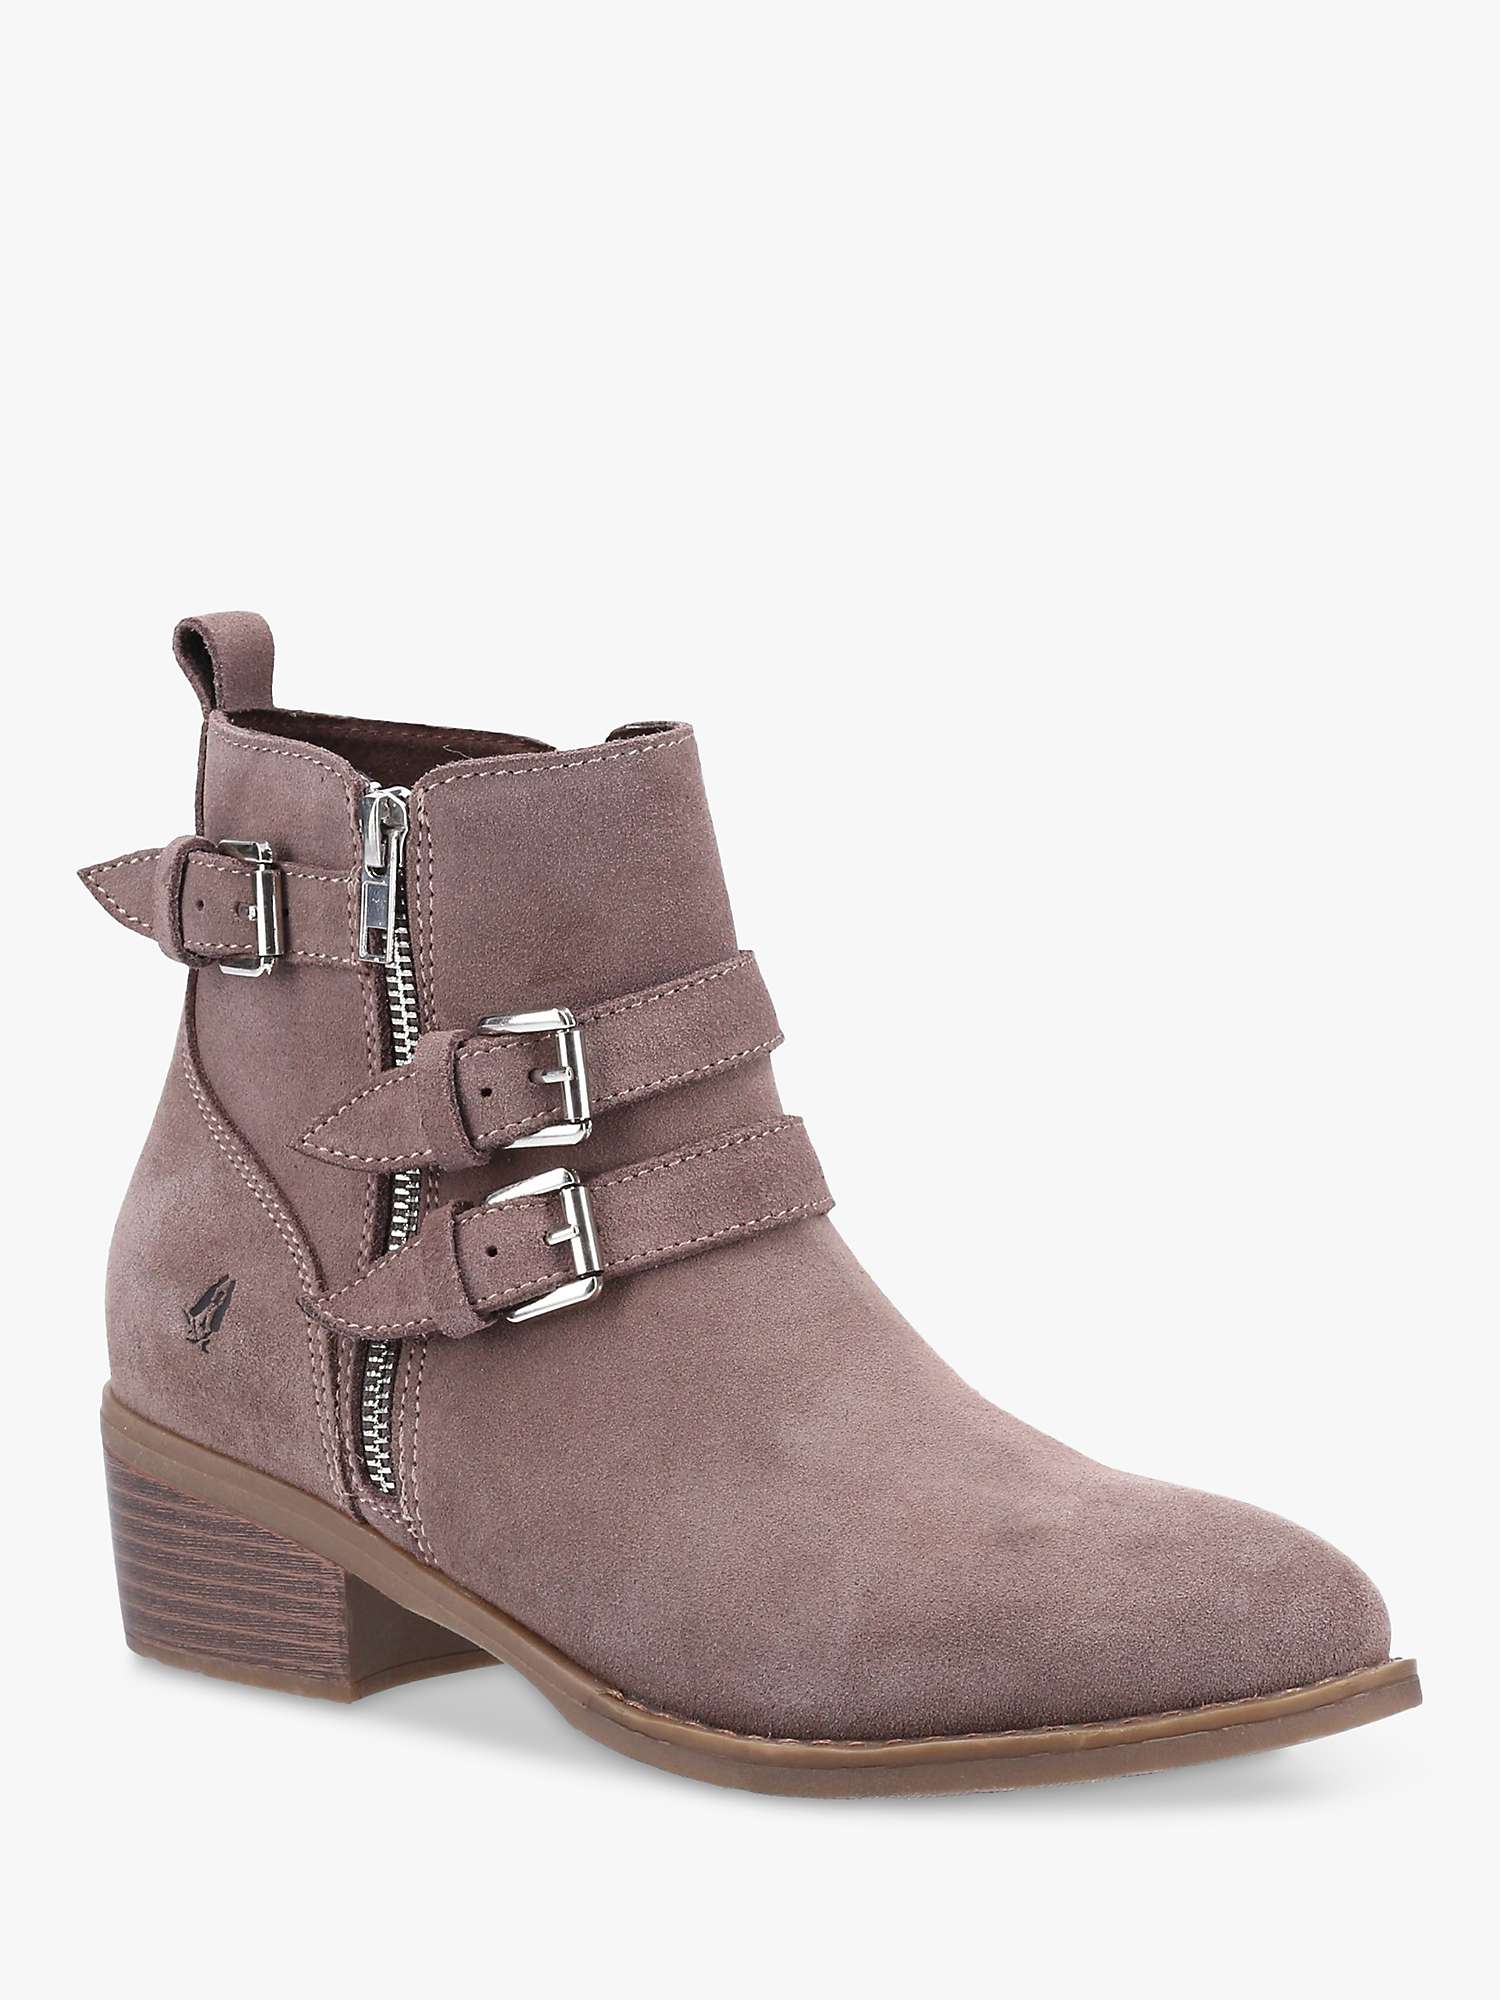 Buy Hush Puppies Jenna Suede Ankle Boots Online at johnlewis.com